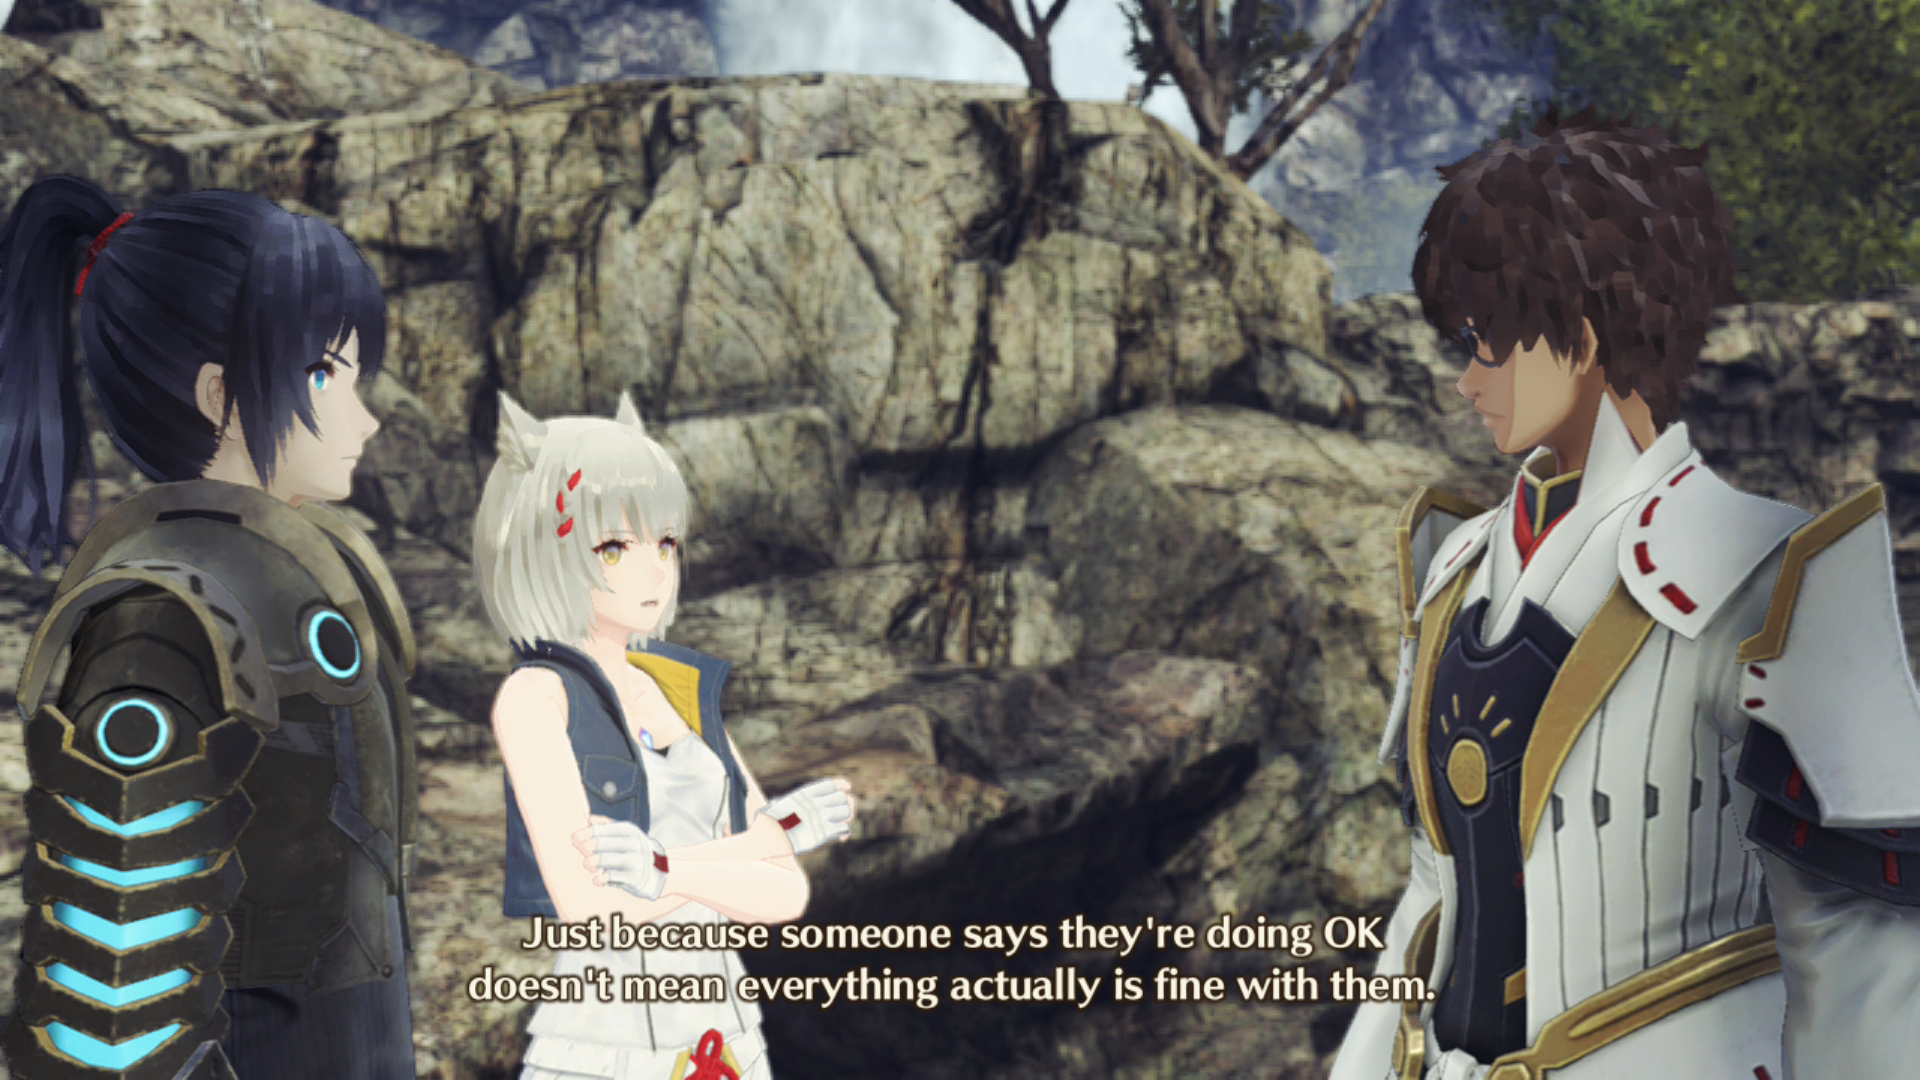 Xenoblade Chronicles 3 Quest Guide: All Quests and how to complete them